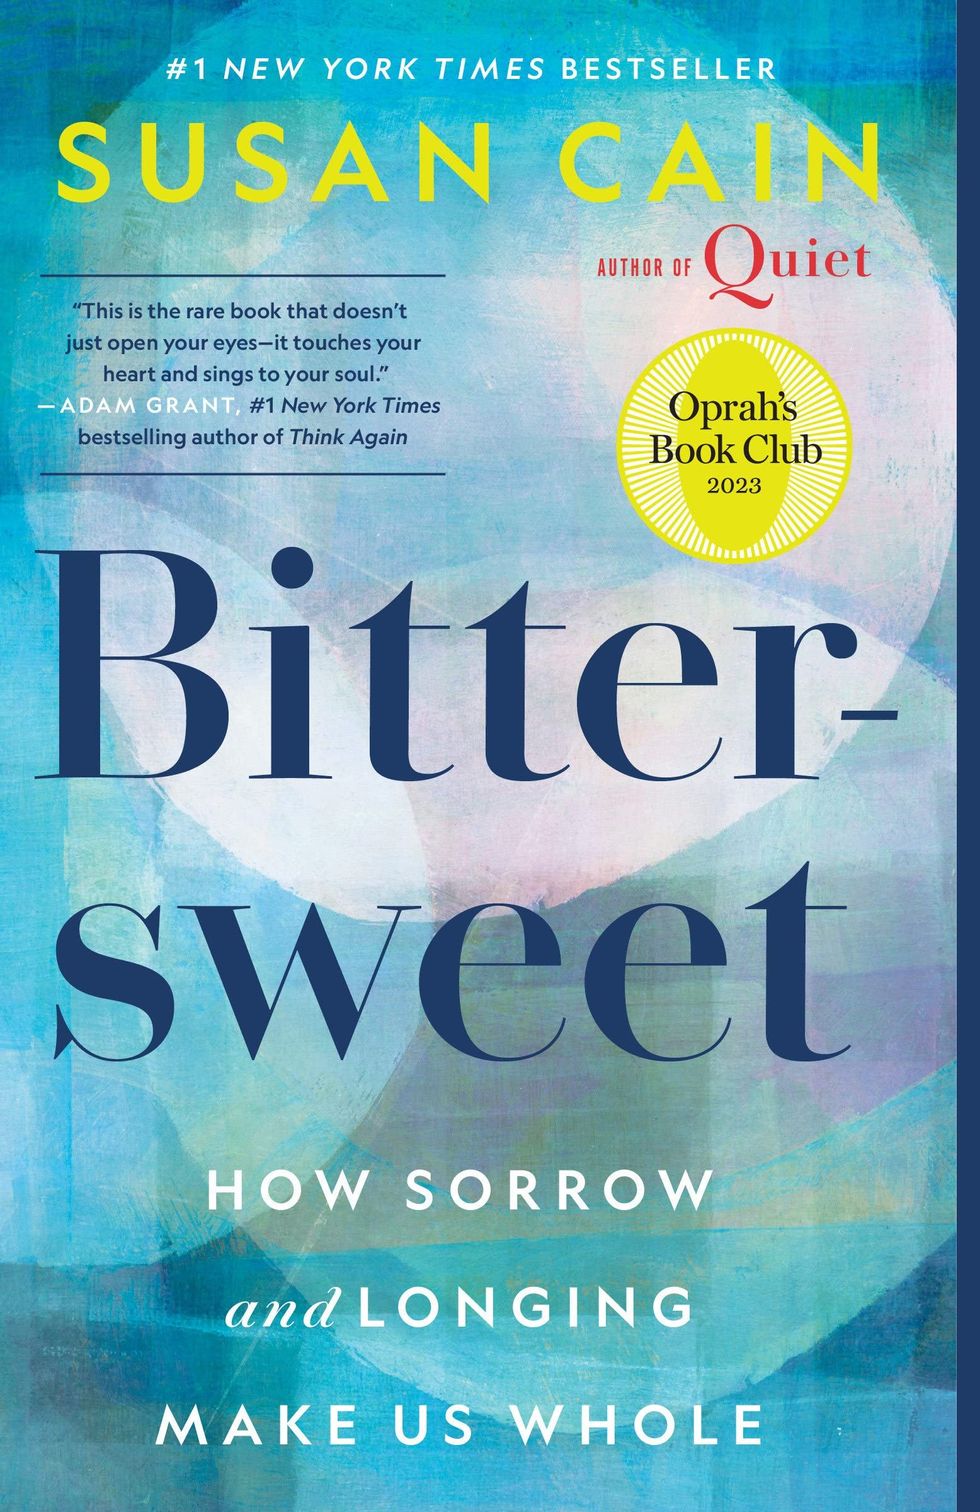 "Bittersweet" by Susan Cain